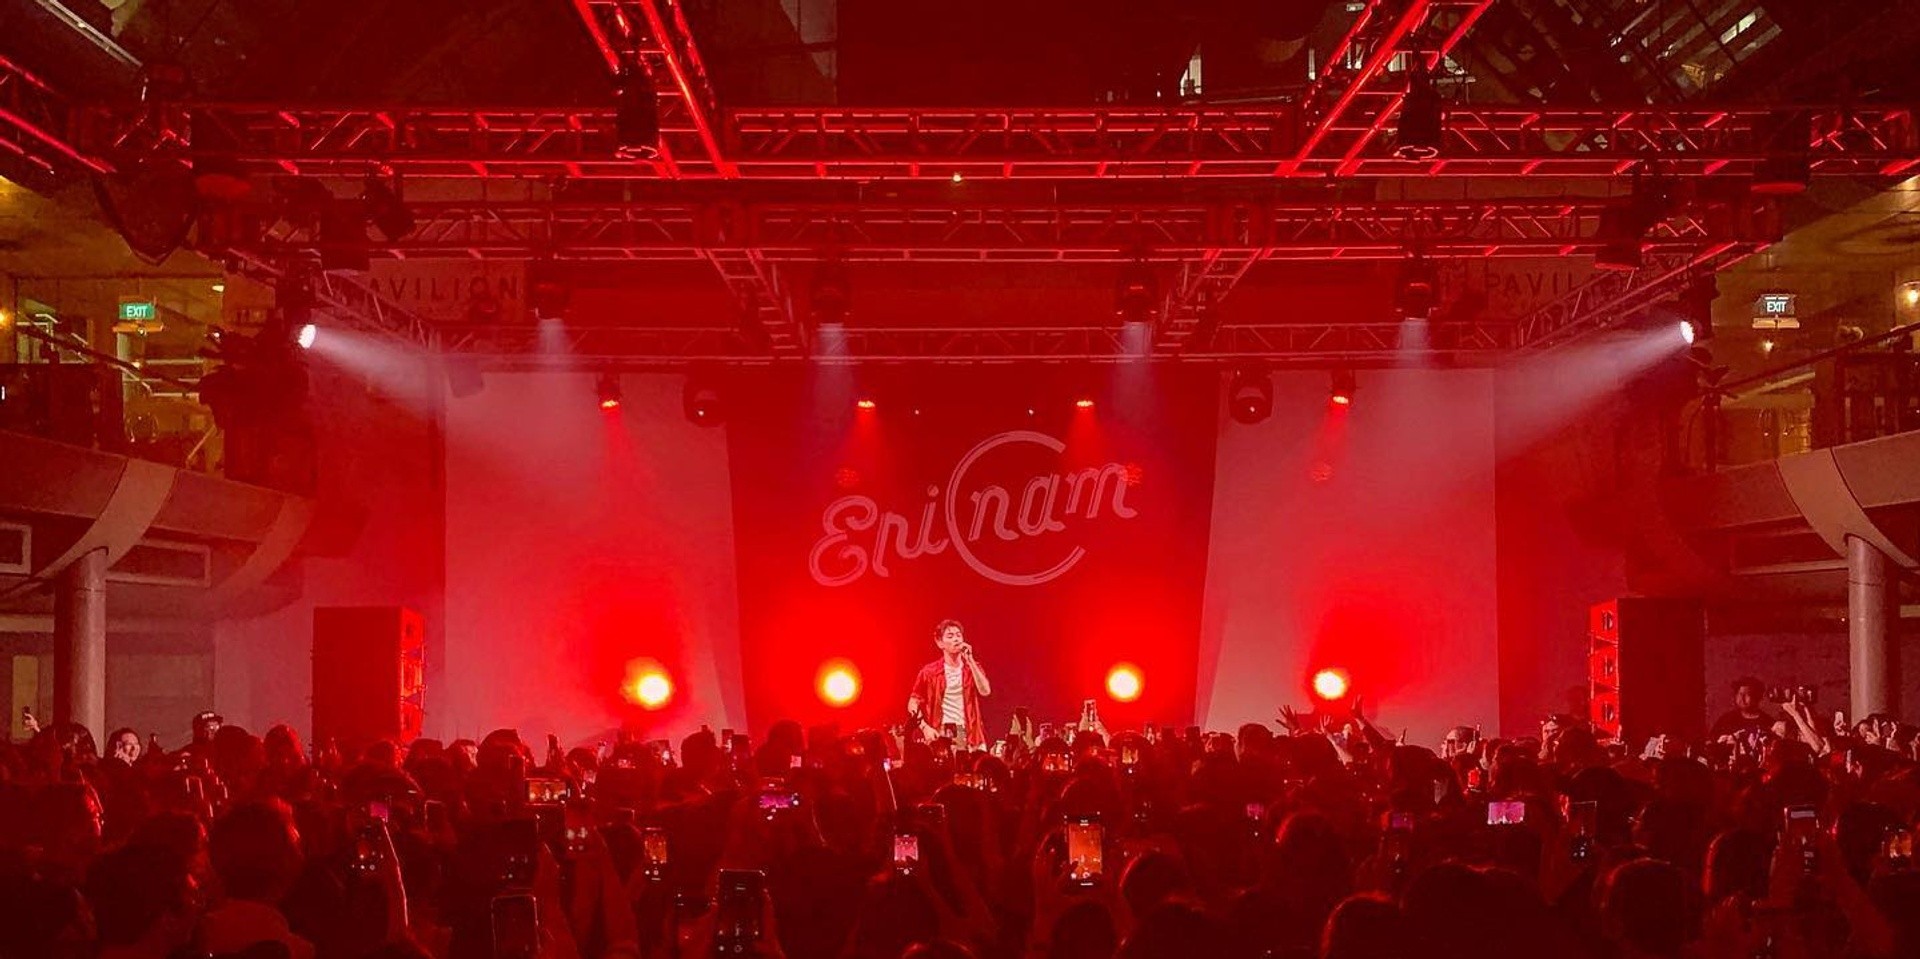 Eric Nam got fans swooning in his sold-out Singapore show - gig report  